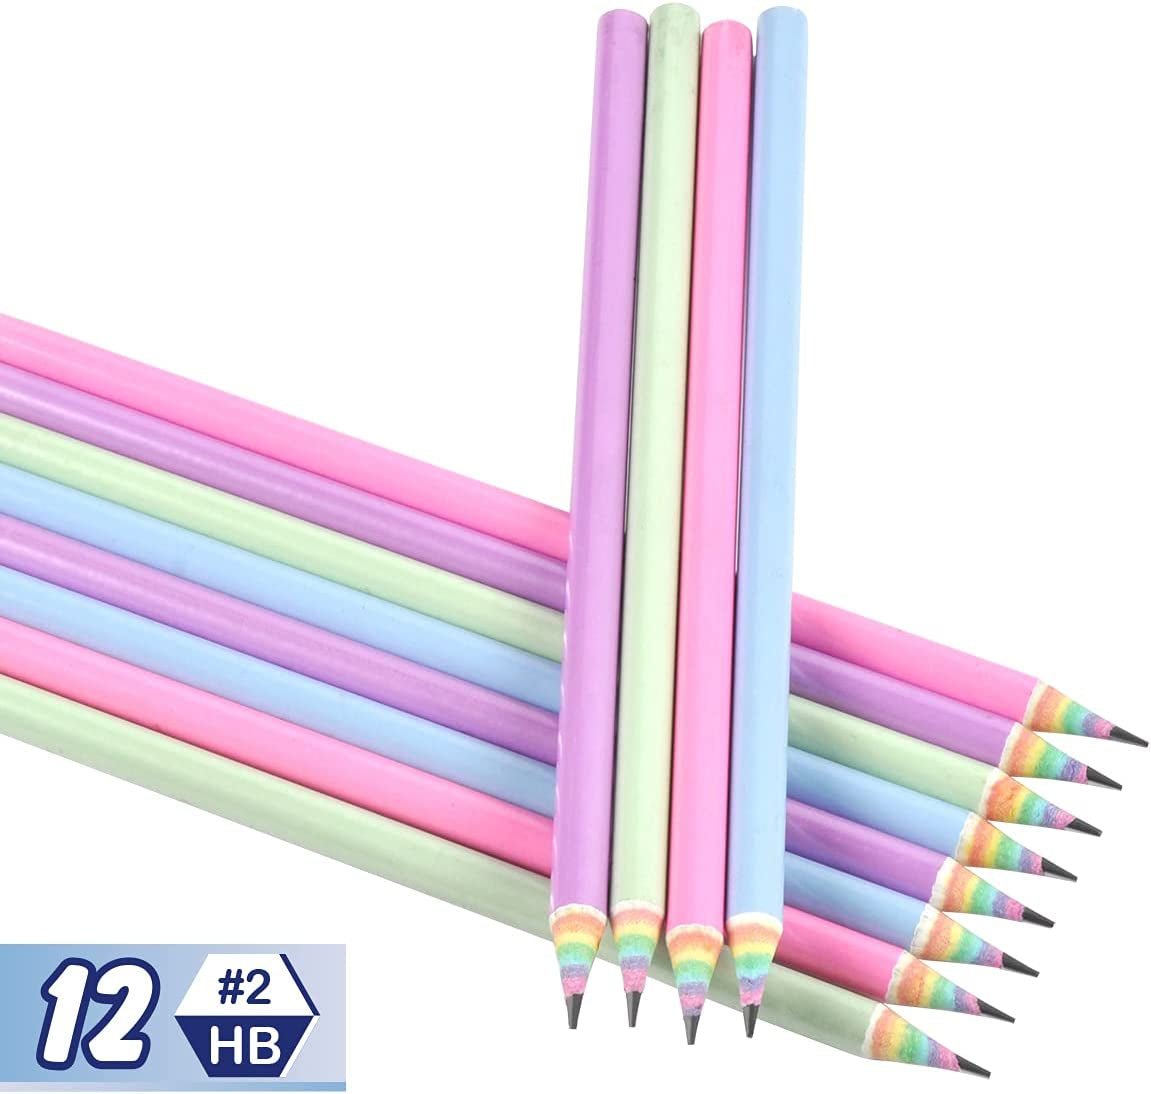 Eco-Friendly Wood & Plastic Free Rainbow Recycled Paper #2 HB Pencils for School and Office Supplies, Pre-Sharpened,12-Pack